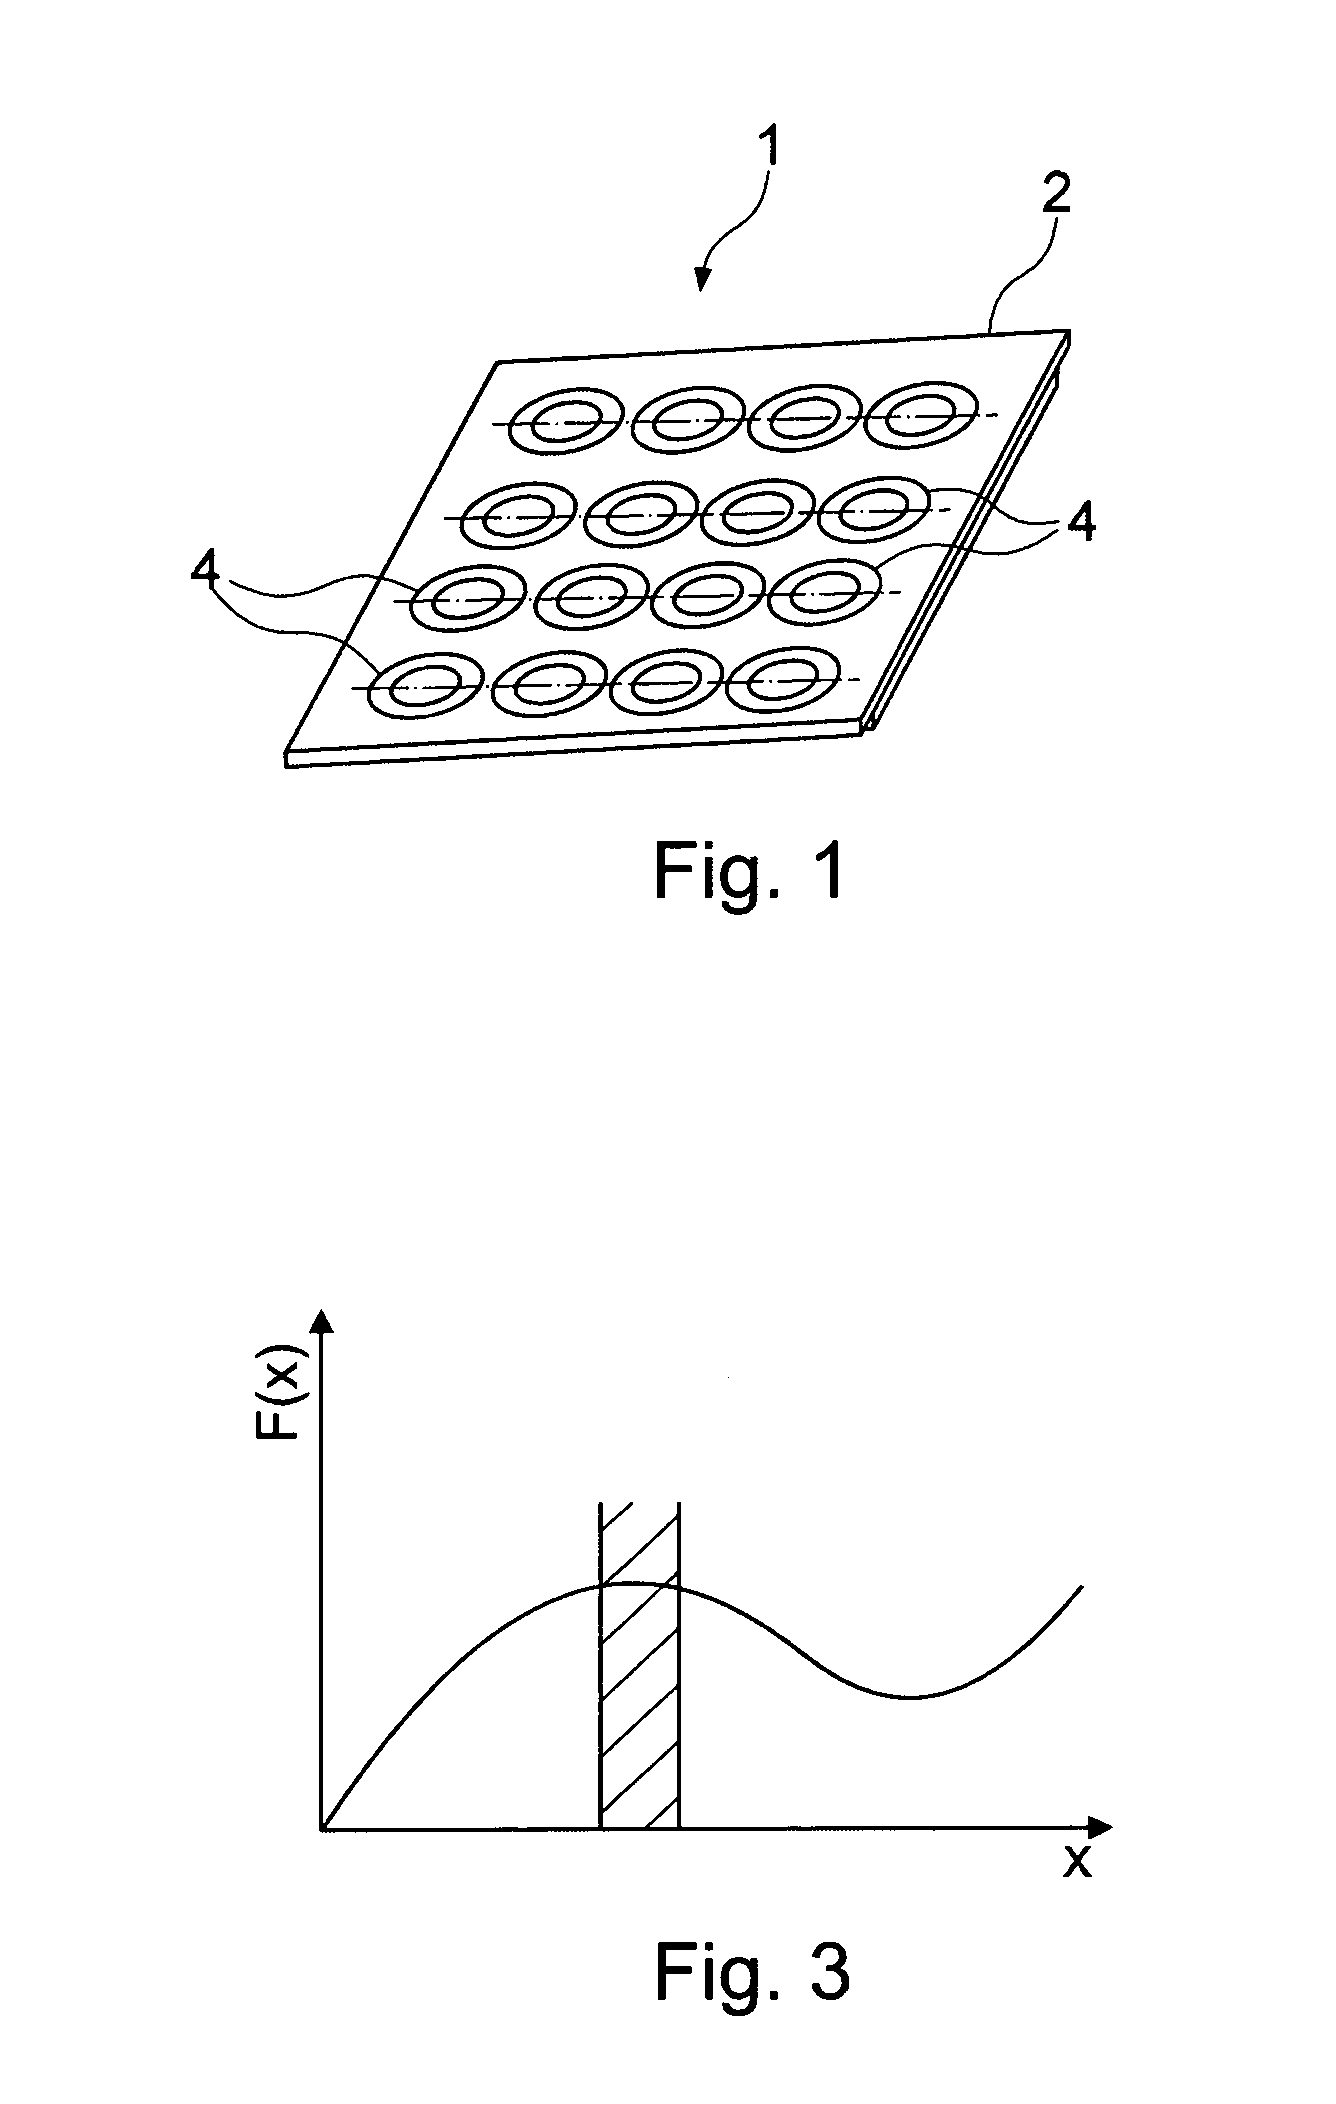 Sound Absorbing Element and Method for Producing a Sound Absorbing Element